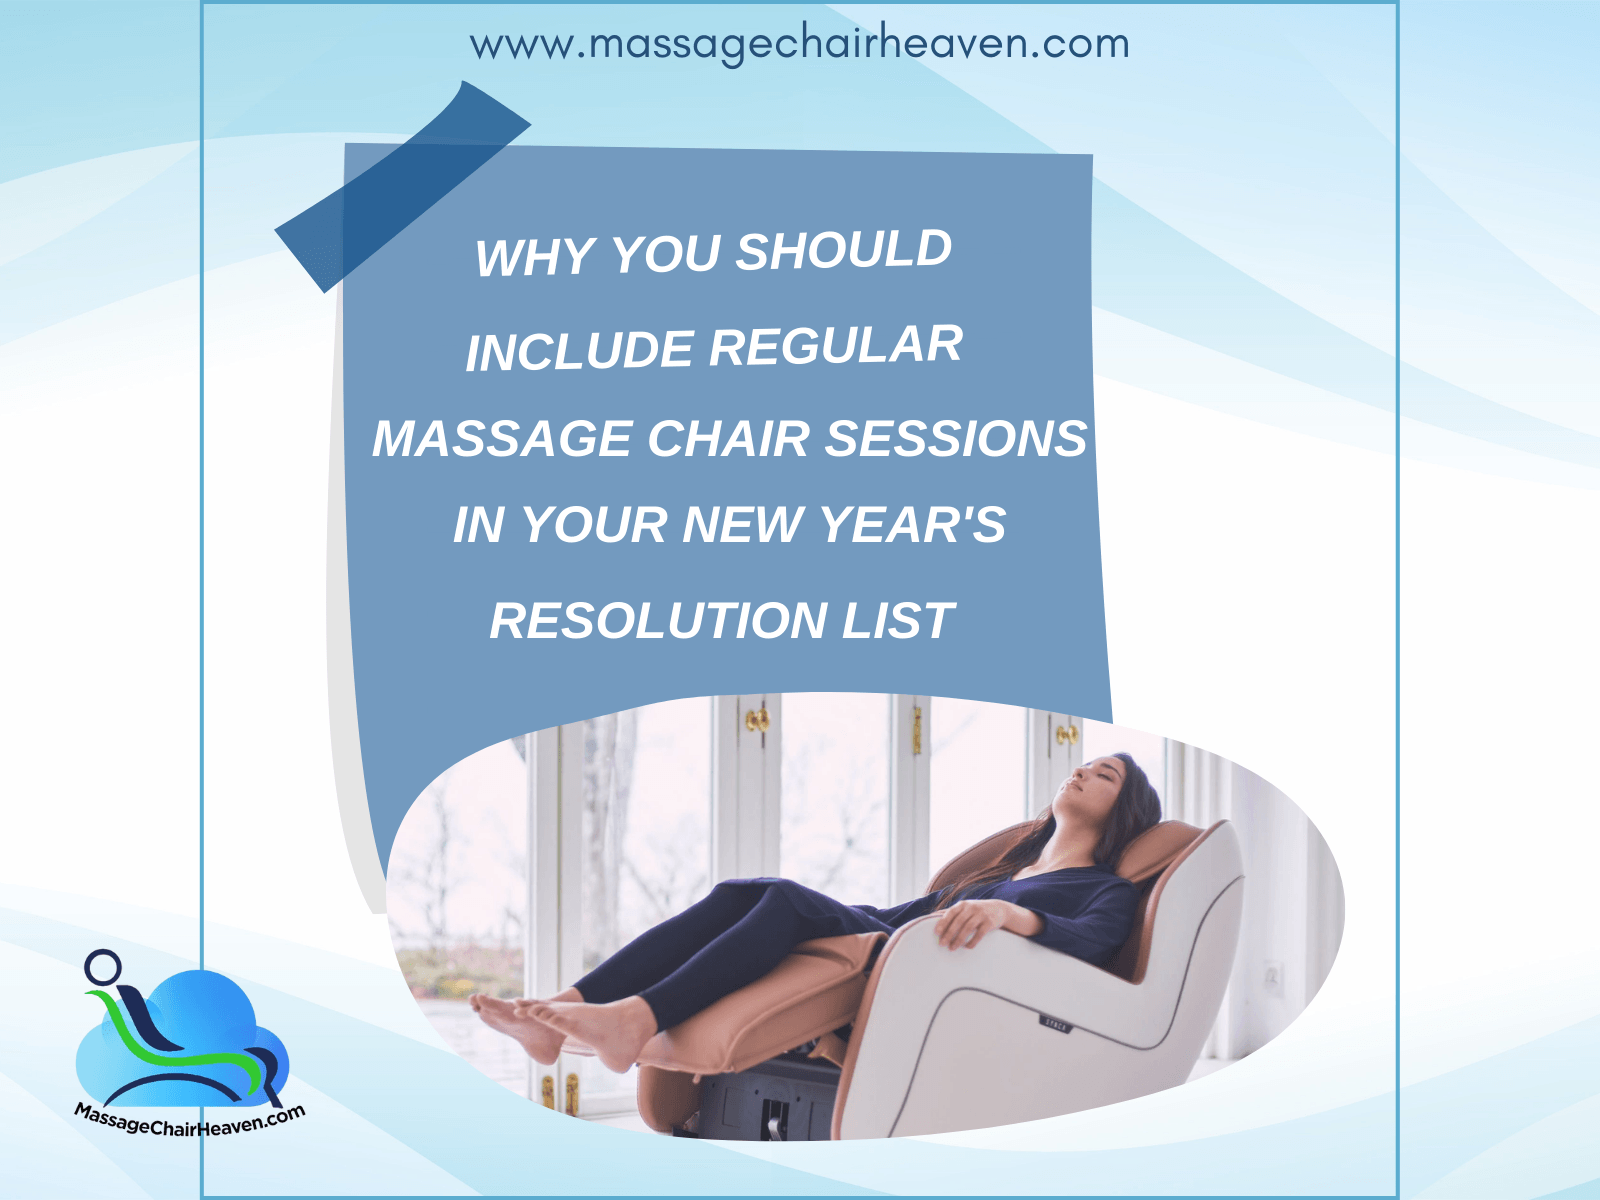 Why You Should Include Regular Massage Chair Sessions In Your New Year’s Resolution List - Massage Chair Heaven